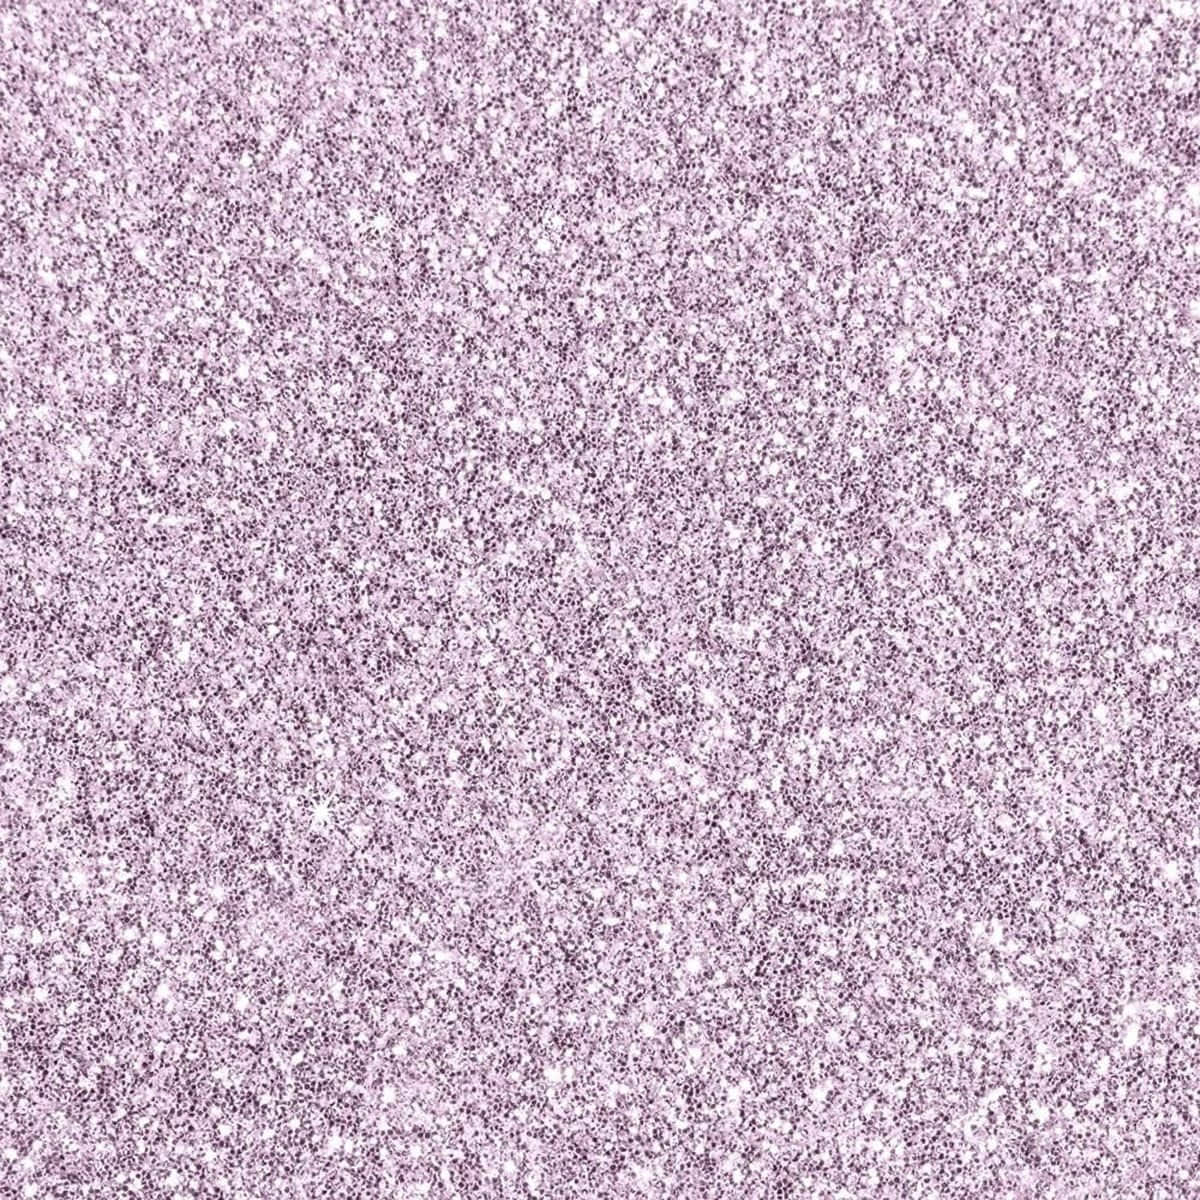 Show Off Your Crystal Shine with a Sparkly Background